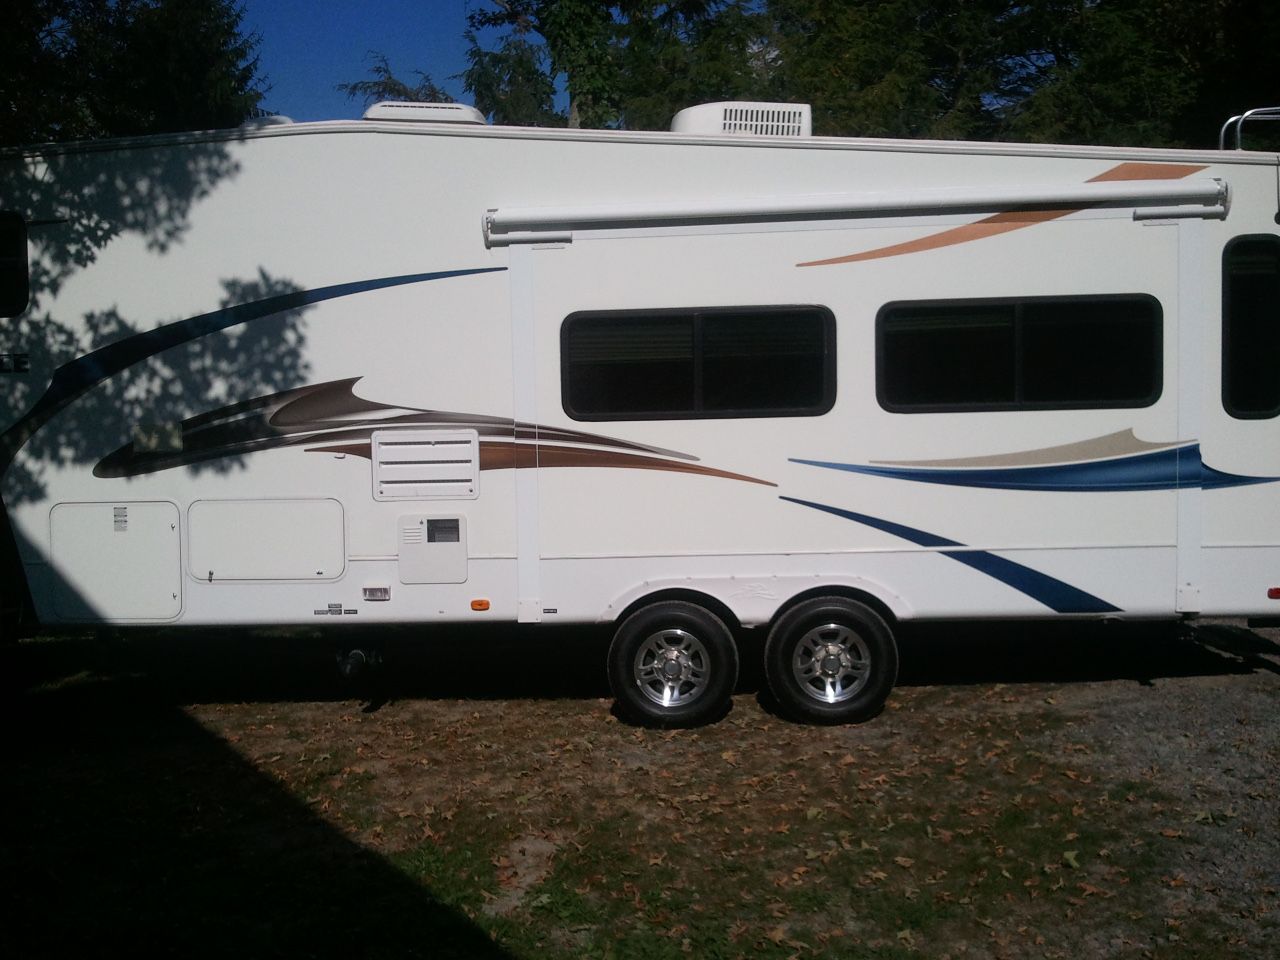 Photo 2010 Sundance Fifth Wheel Book Price $17,000 Asking $11,000 Firm Excellent Shap 8 Slide out Automatic Awning Pullout contact info removed